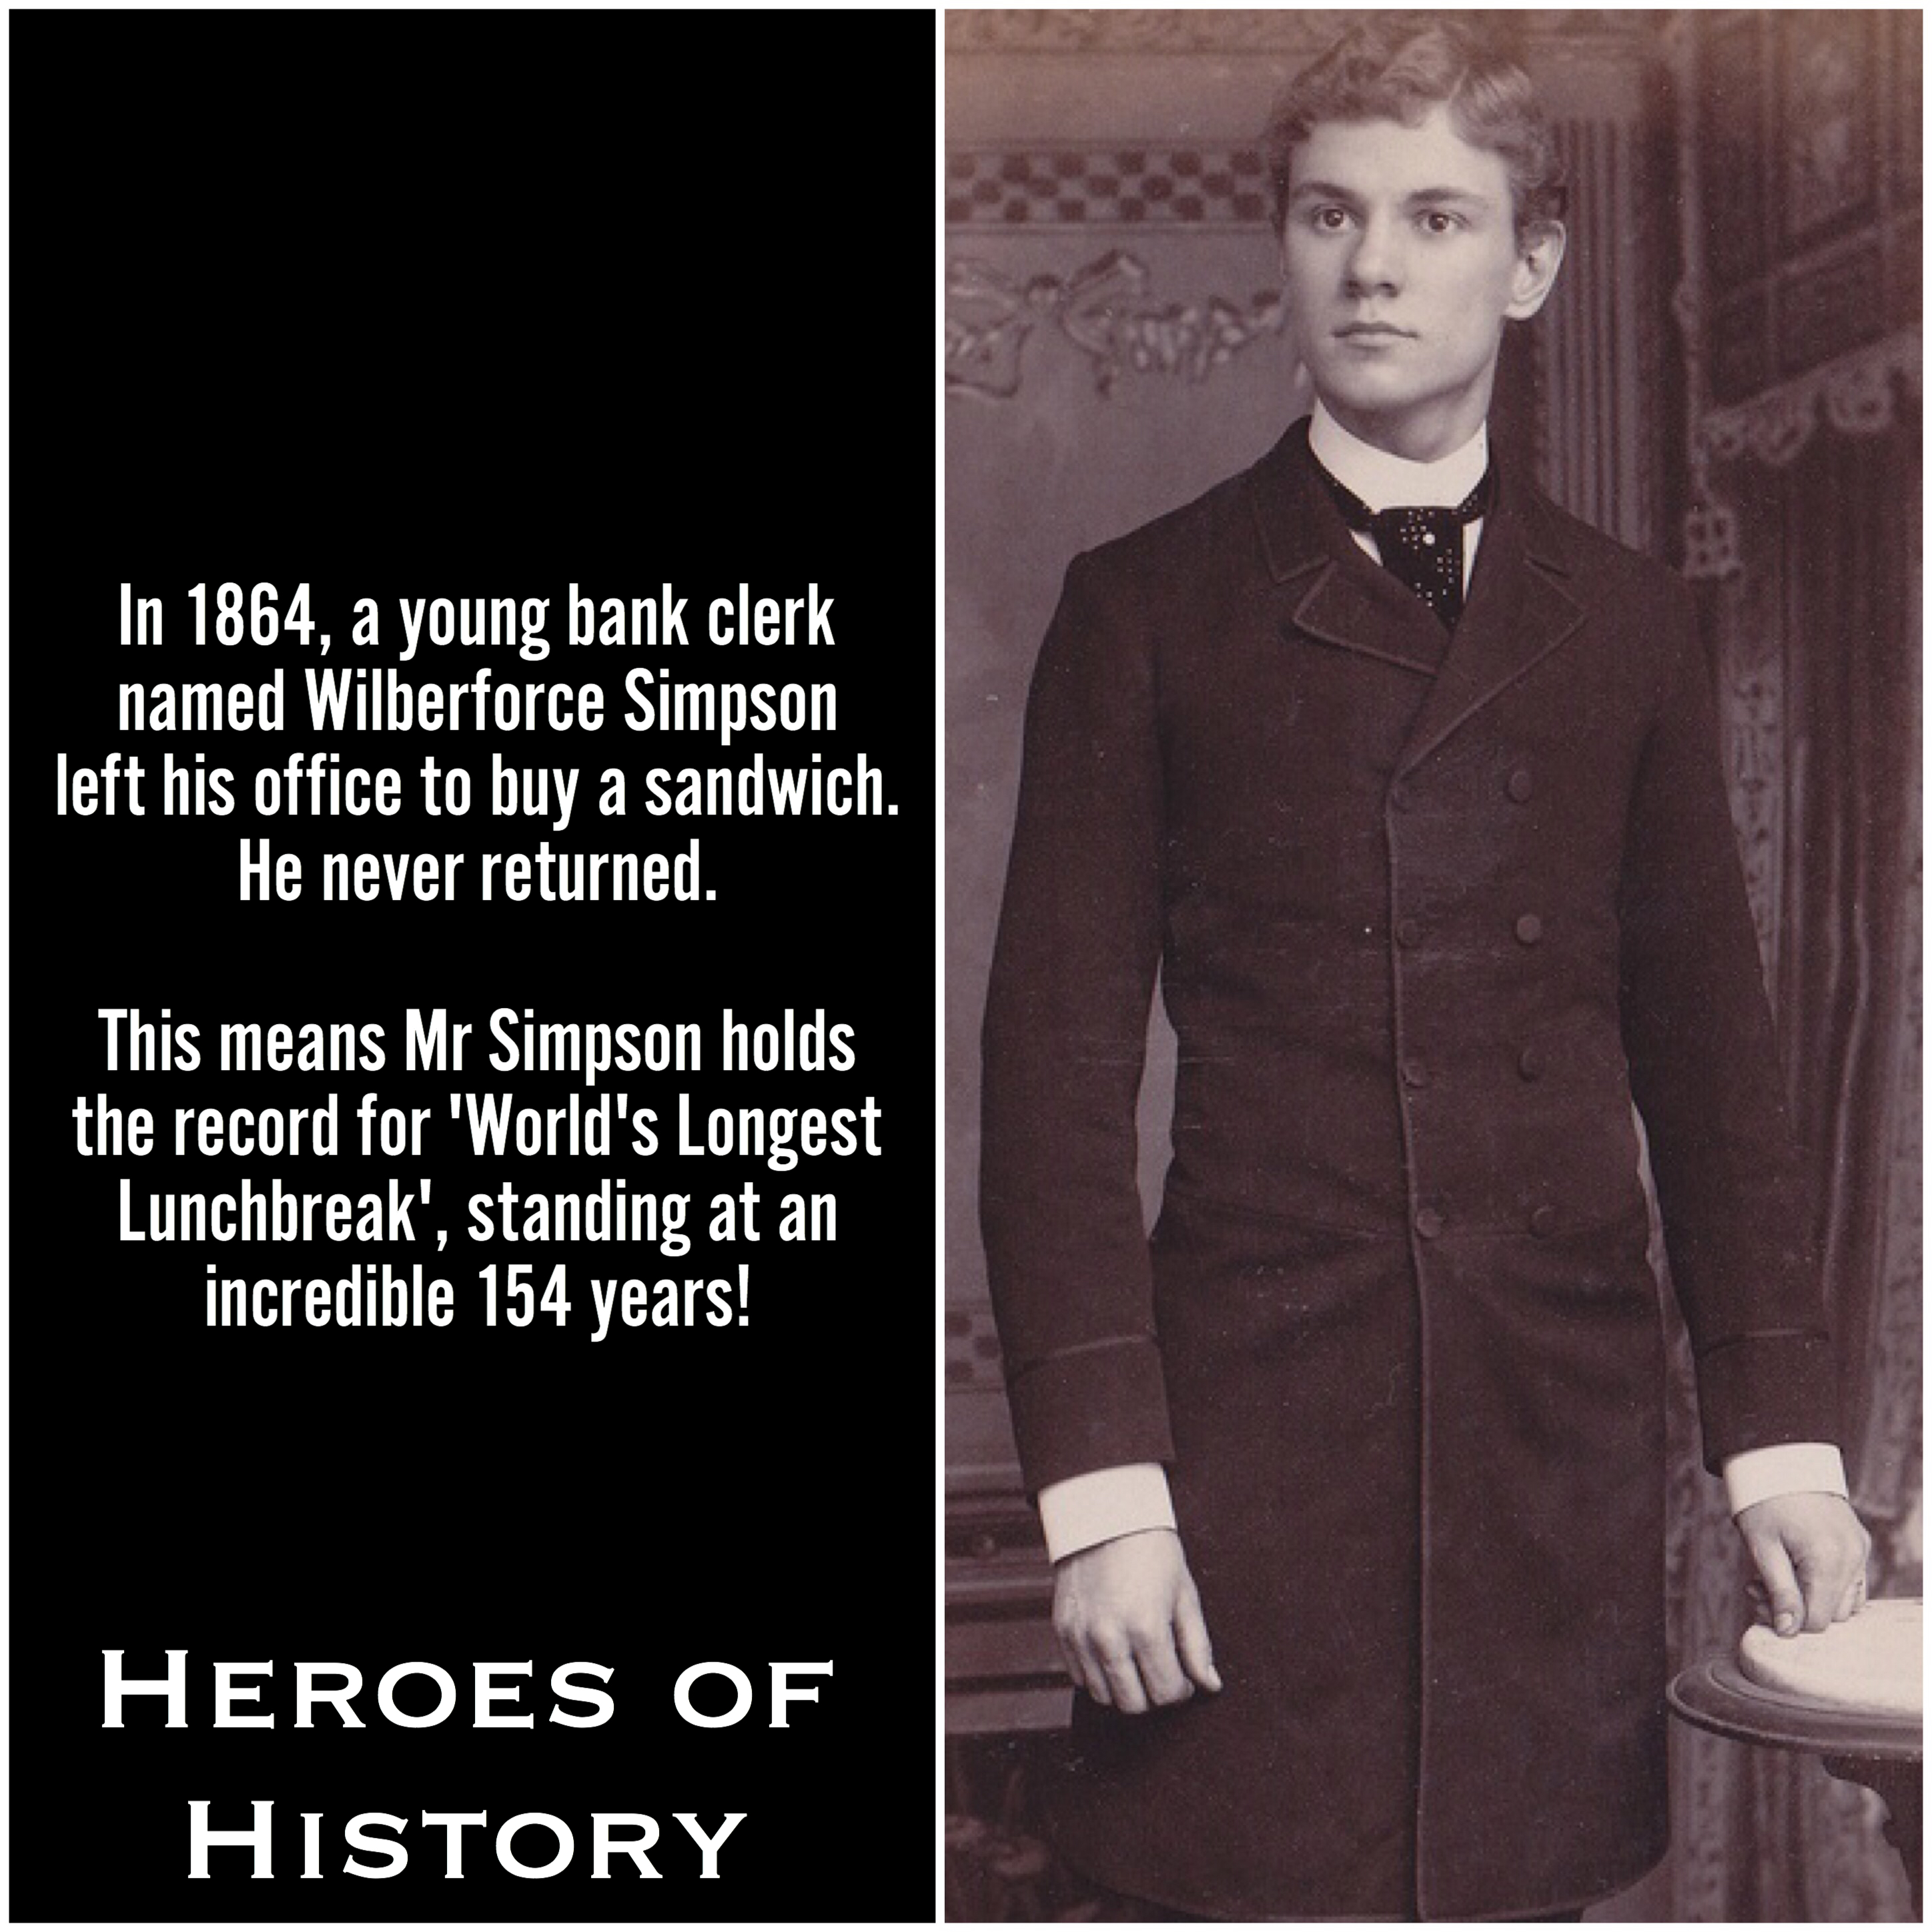 gentleman - In 1864, a young bank clerk named Wilberforce Simpson left his office to buy a sandwich. He never returned. This means Mr Simpson holds the record for 'World's Longest Lunchbreak', standing at an incredible 154 years! Heroes Of History